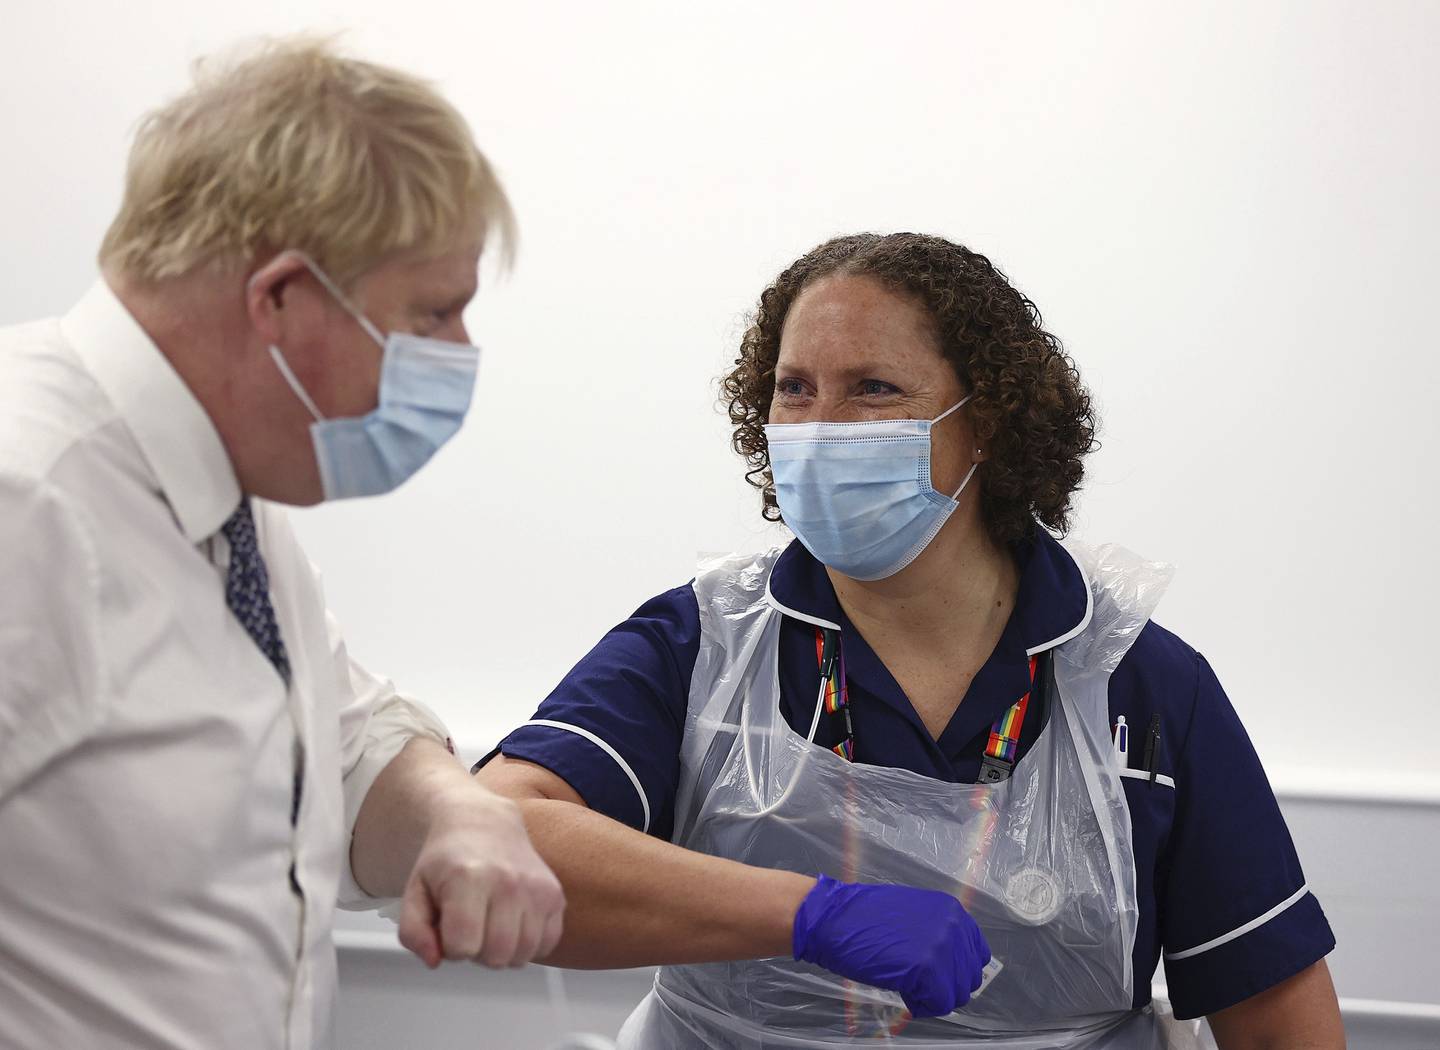 Britain's Prime Minister Boris Johnson greets a vaccination trainer during a hosptial visit as he faces further questions over his role in the Nusrat Ghani sacking. AP